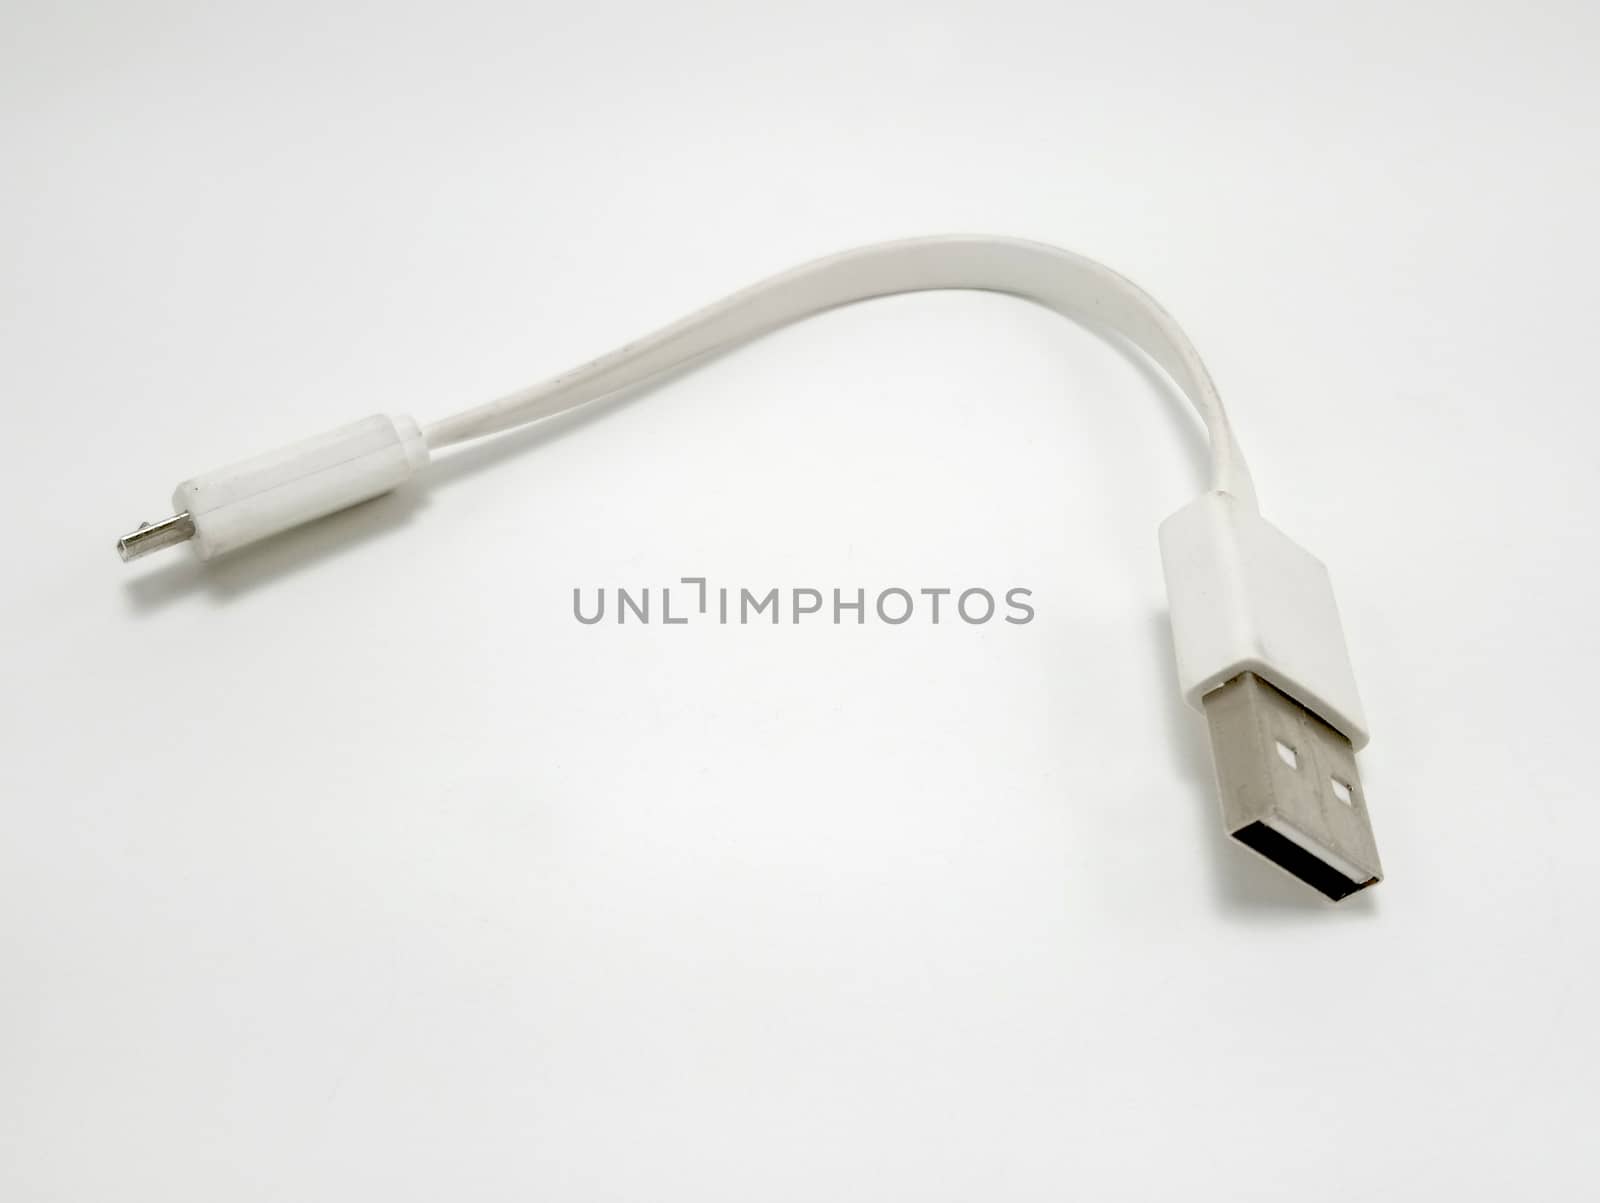 Universal Serial Bus (USB) cord in Quezon City, Philippines by imwaltersy